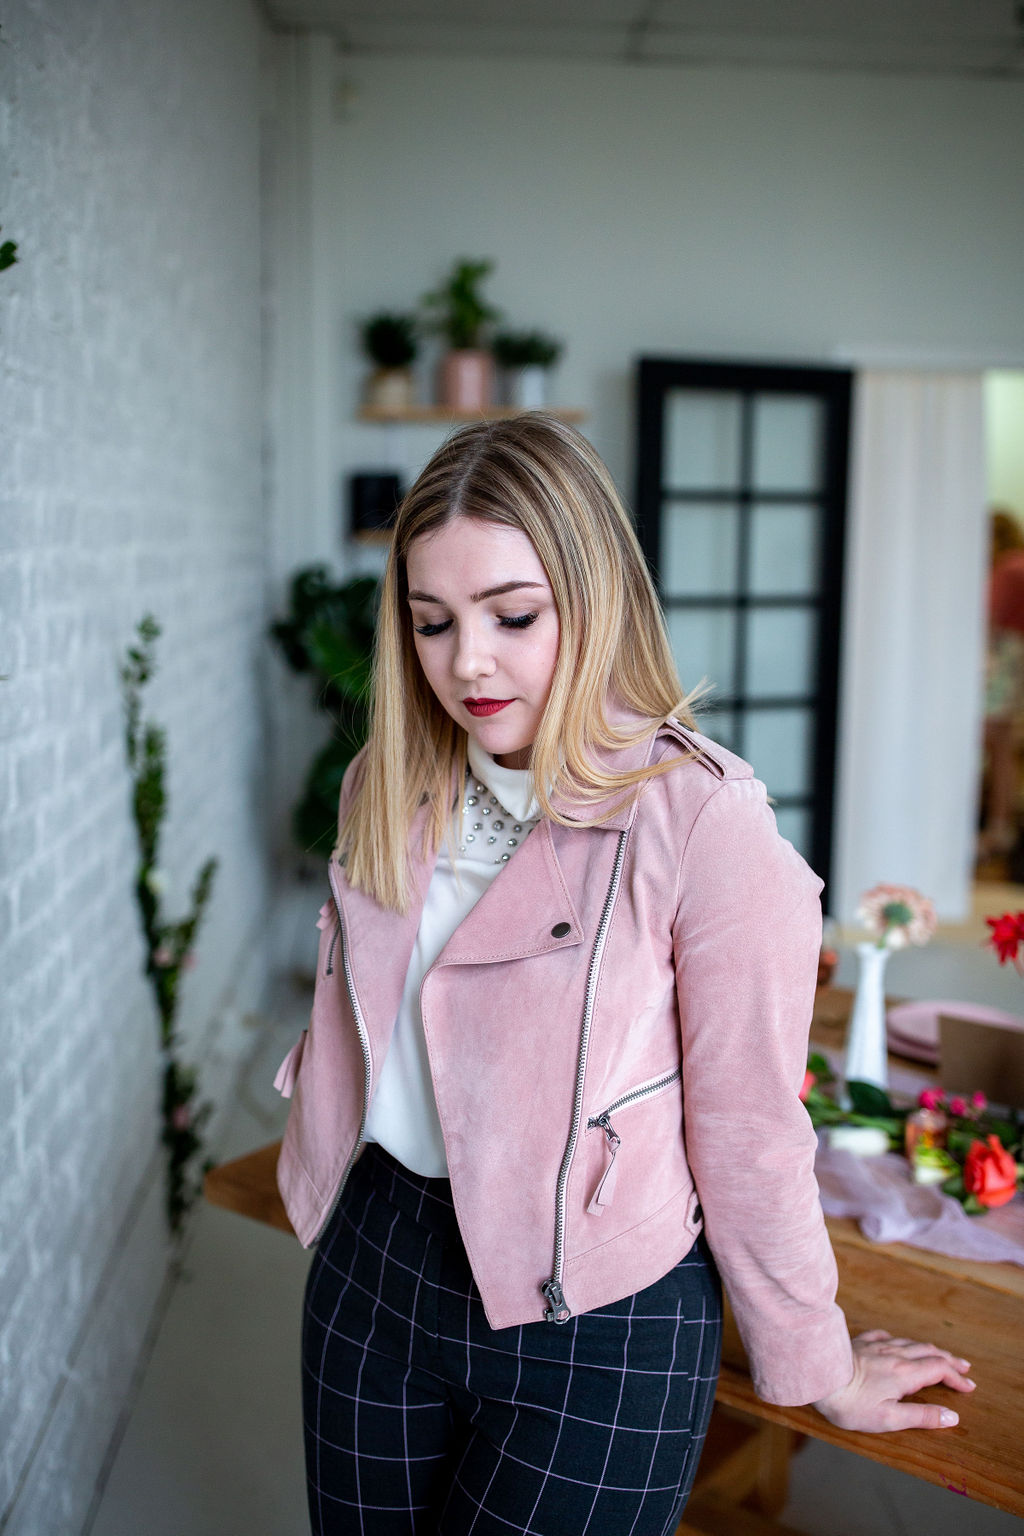 16 Valentine's/Galentine's Day Outfit Ideas!